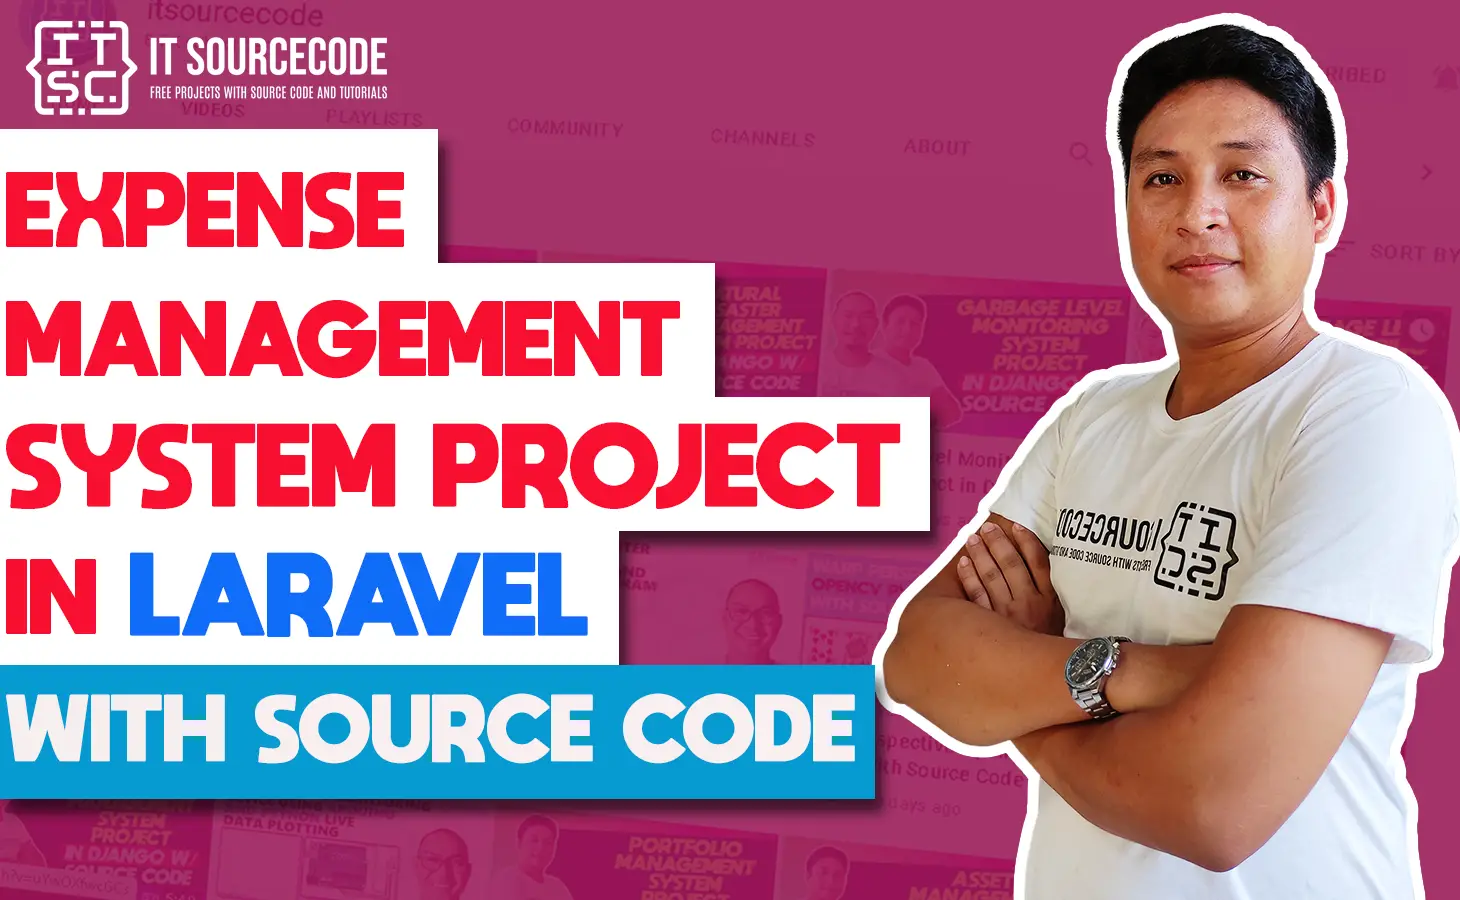 Expense Management System Project in Laravel with Source Code